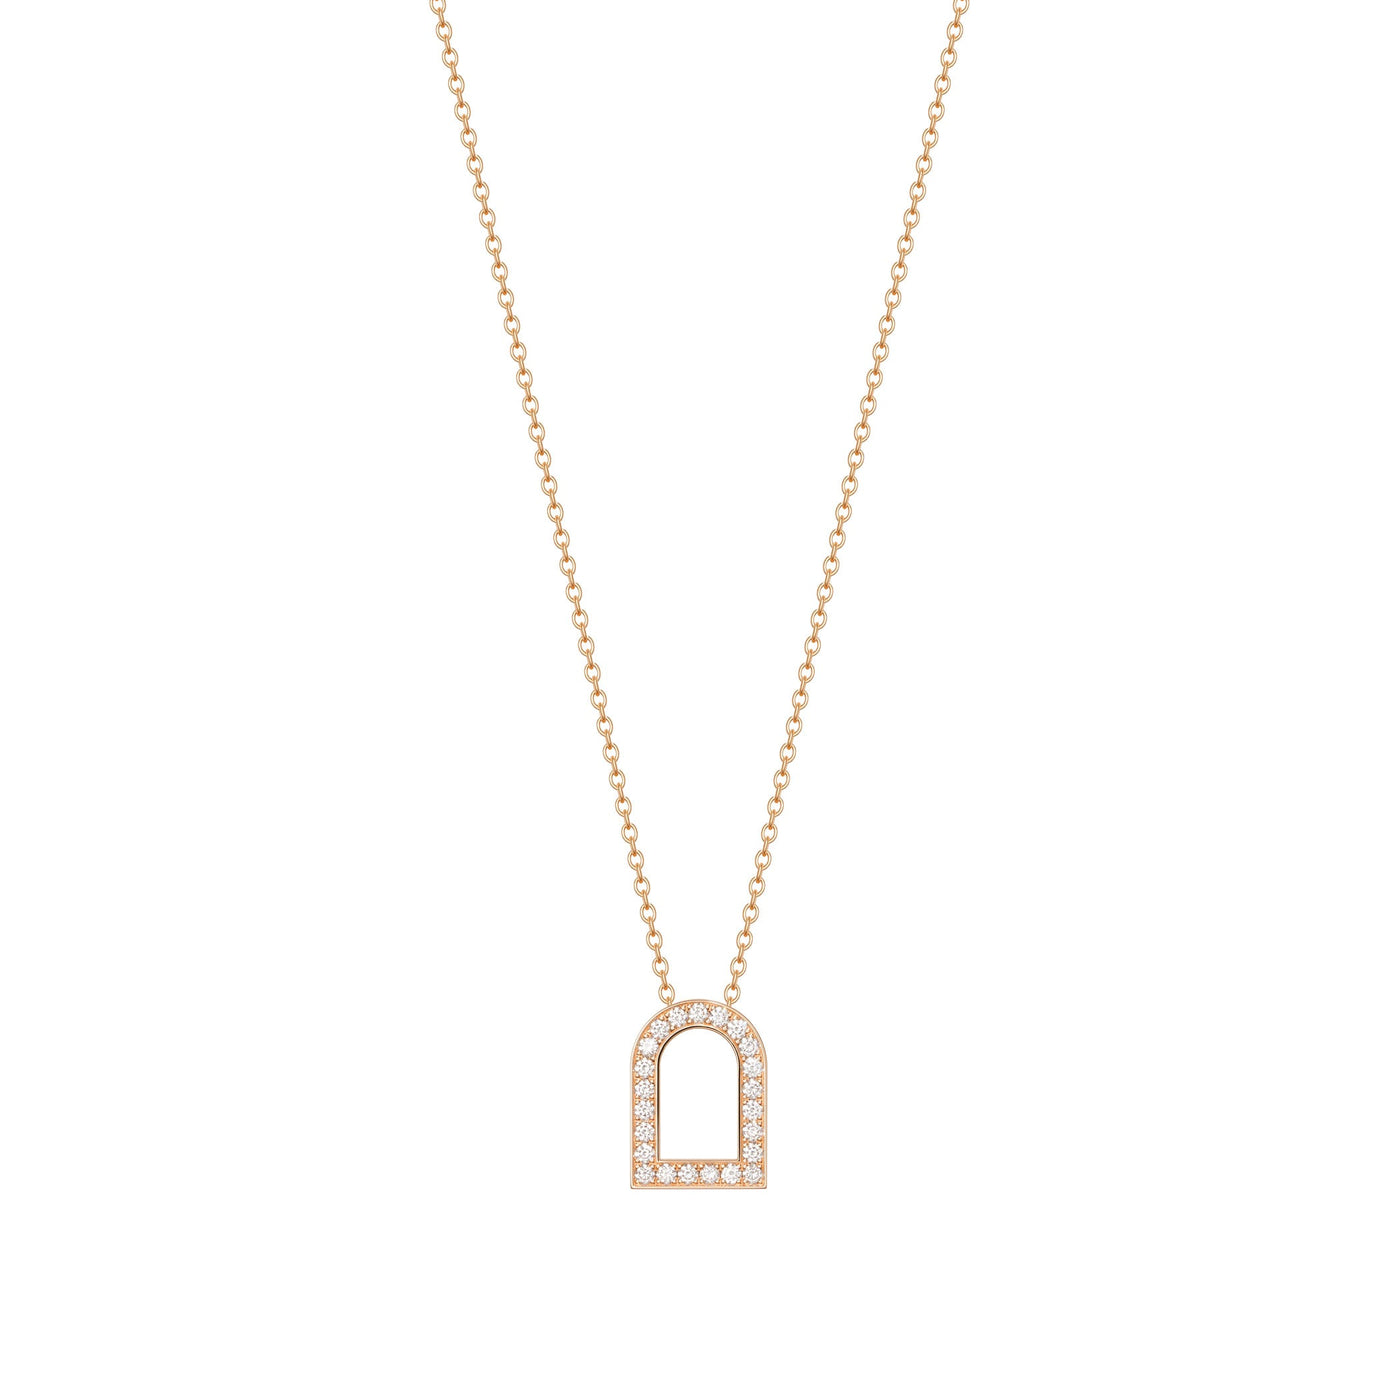 L'Arc Voyage Charm GM, 18k Rose Gold with Galerie Diamonds on Chain Necklace - DAVIDOR